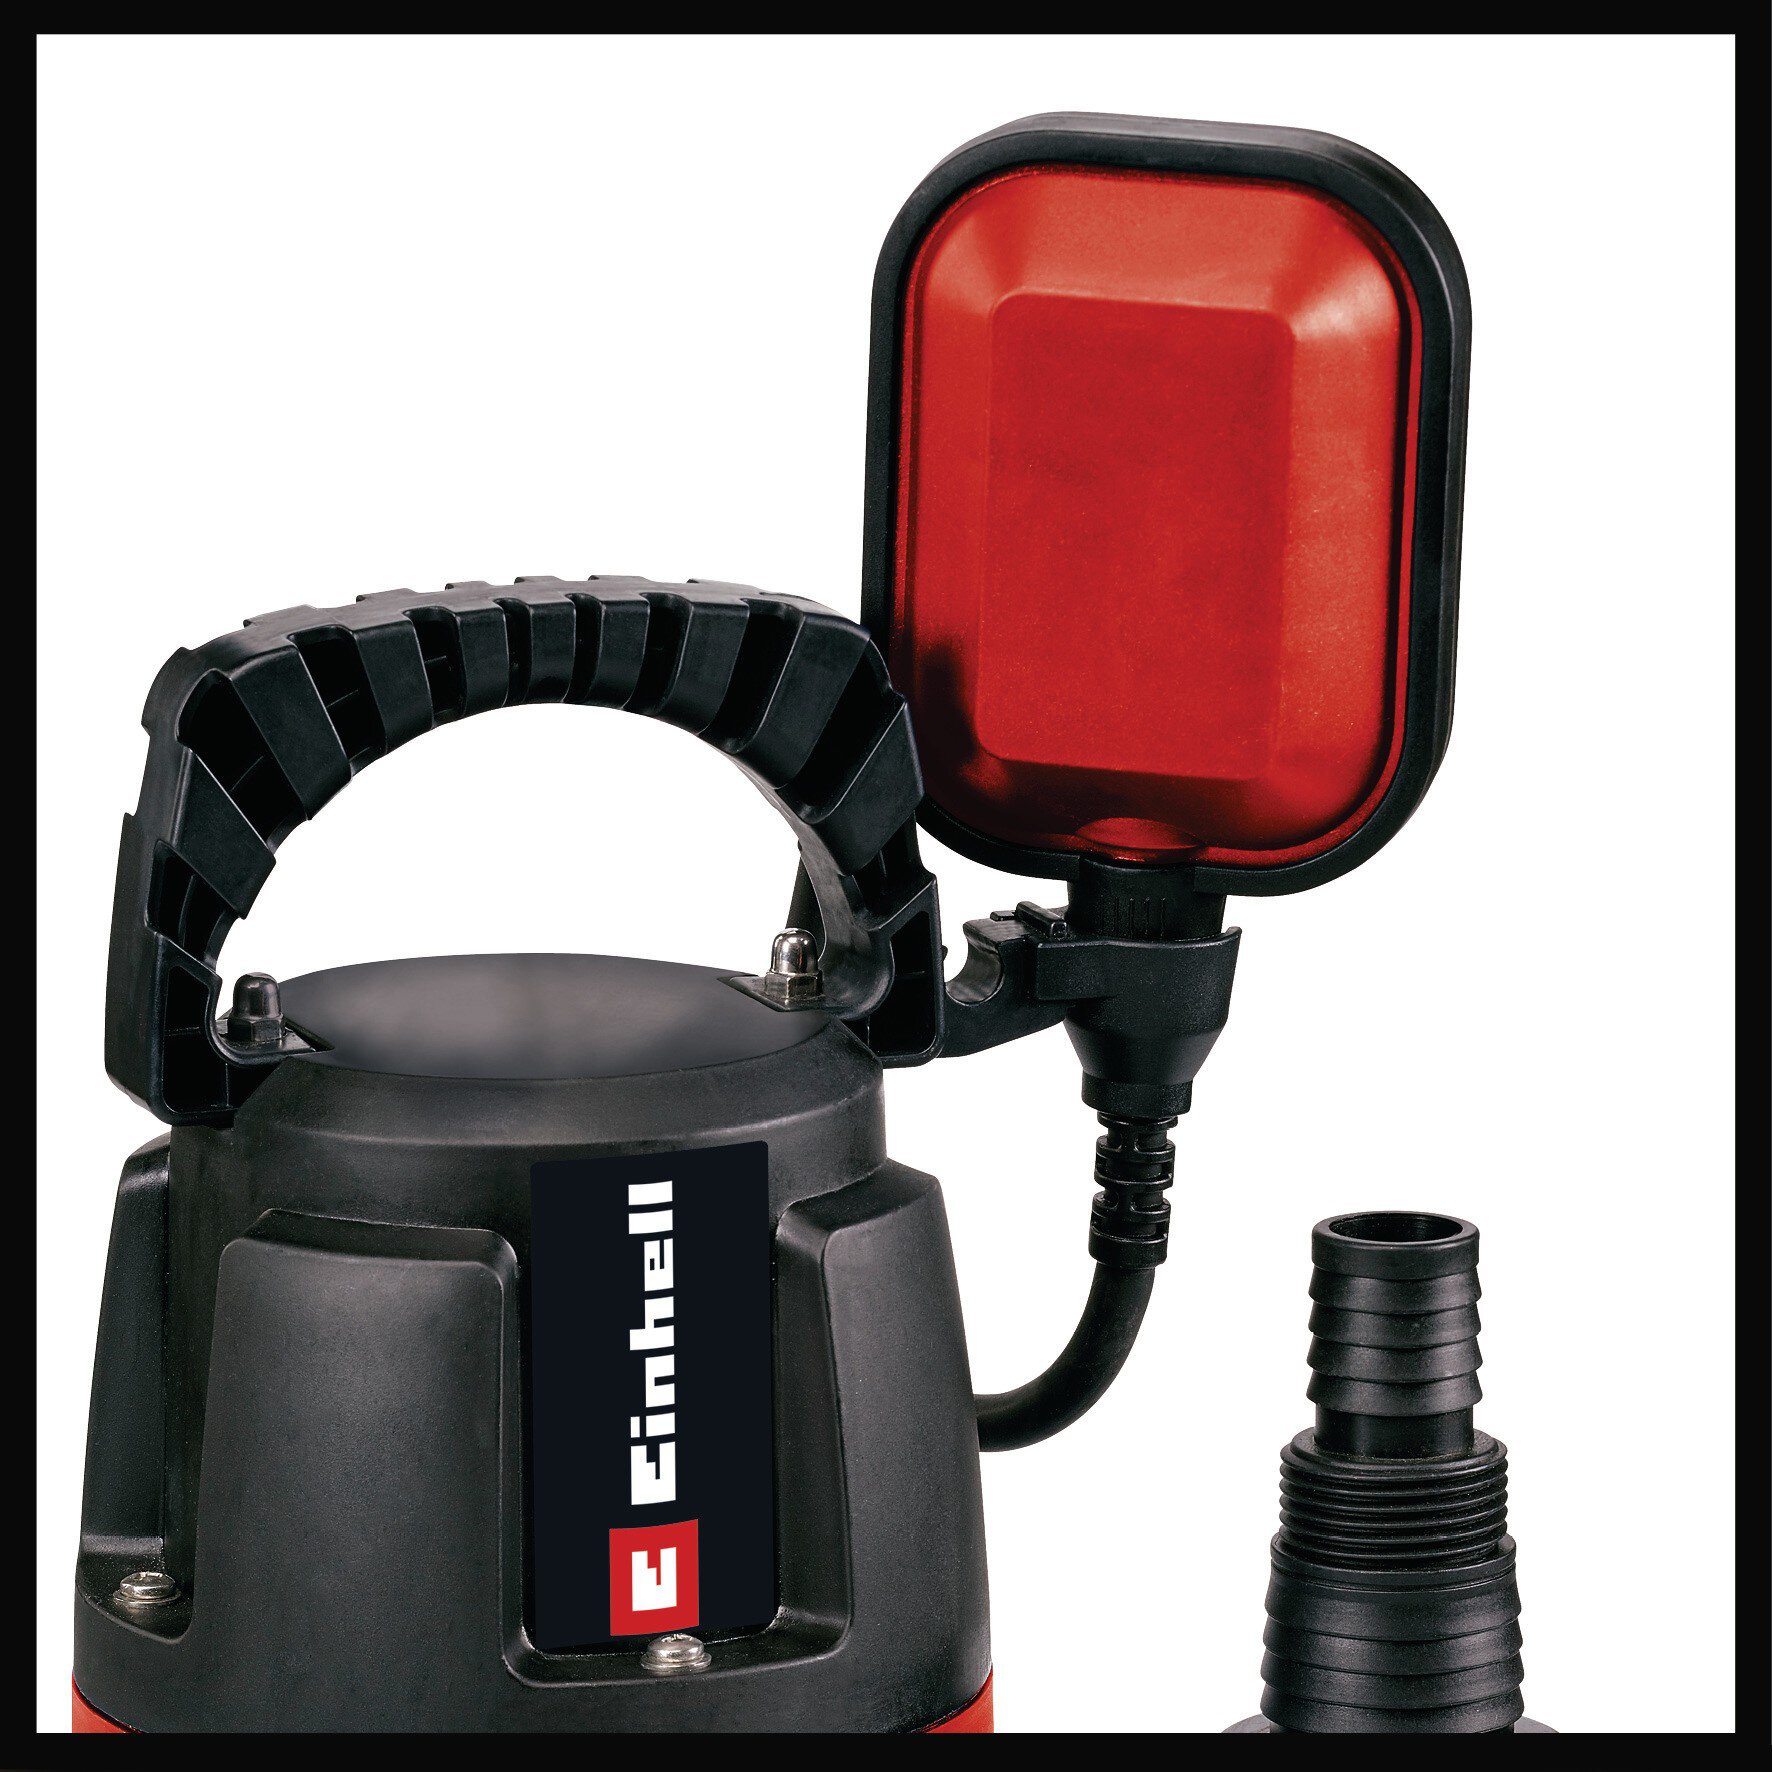 einhell-classic-submersible-pump-4170445-detail_image-002